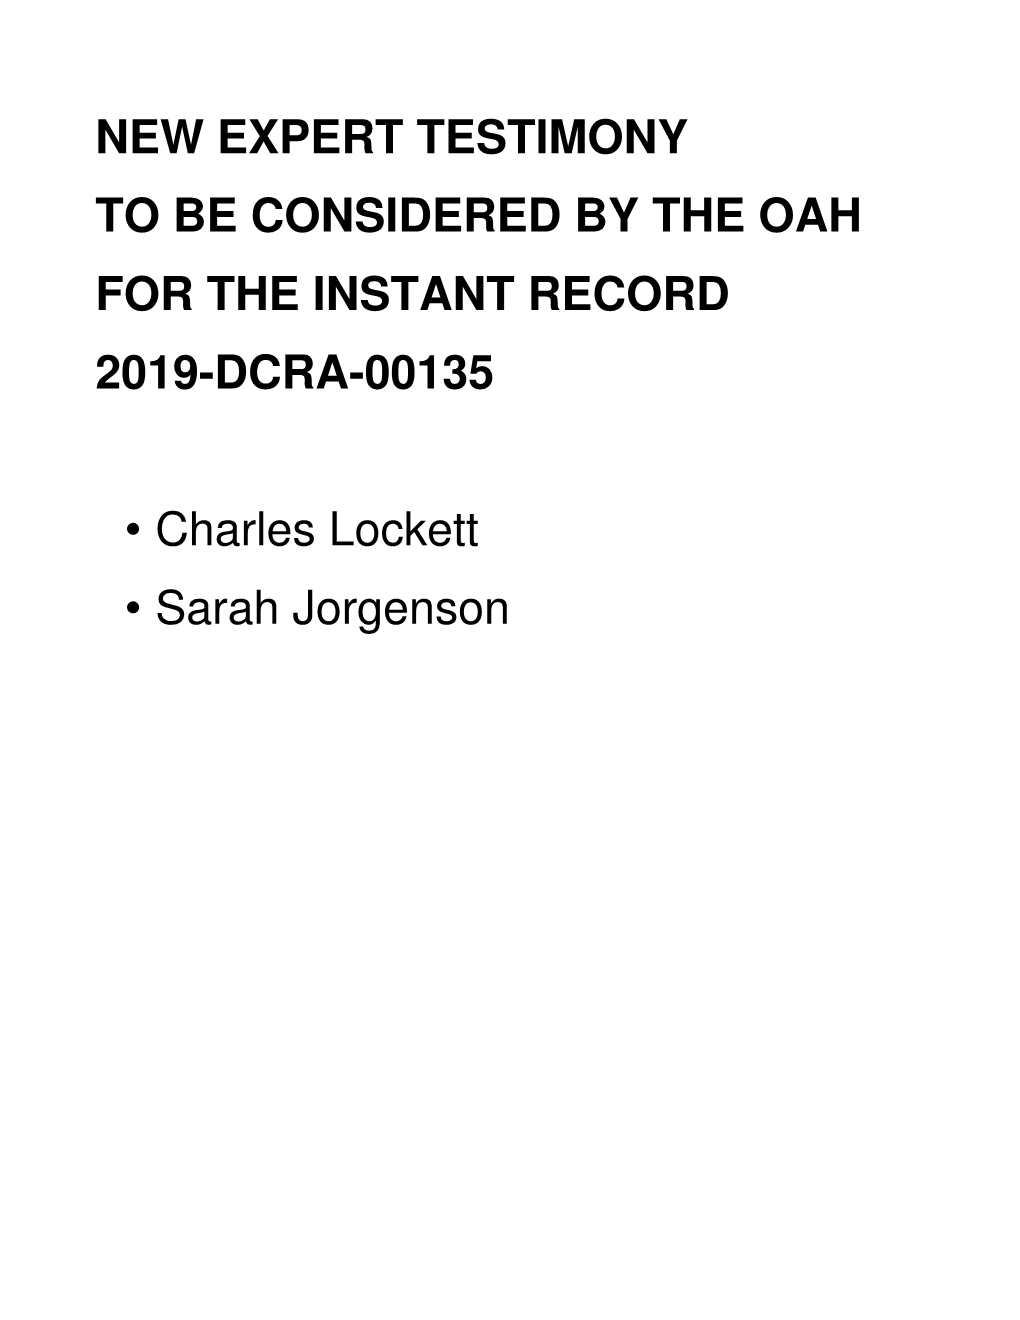 New Expert Testimony to Be Considered by the Oah for the Instant Record 2019-Dcra-00135